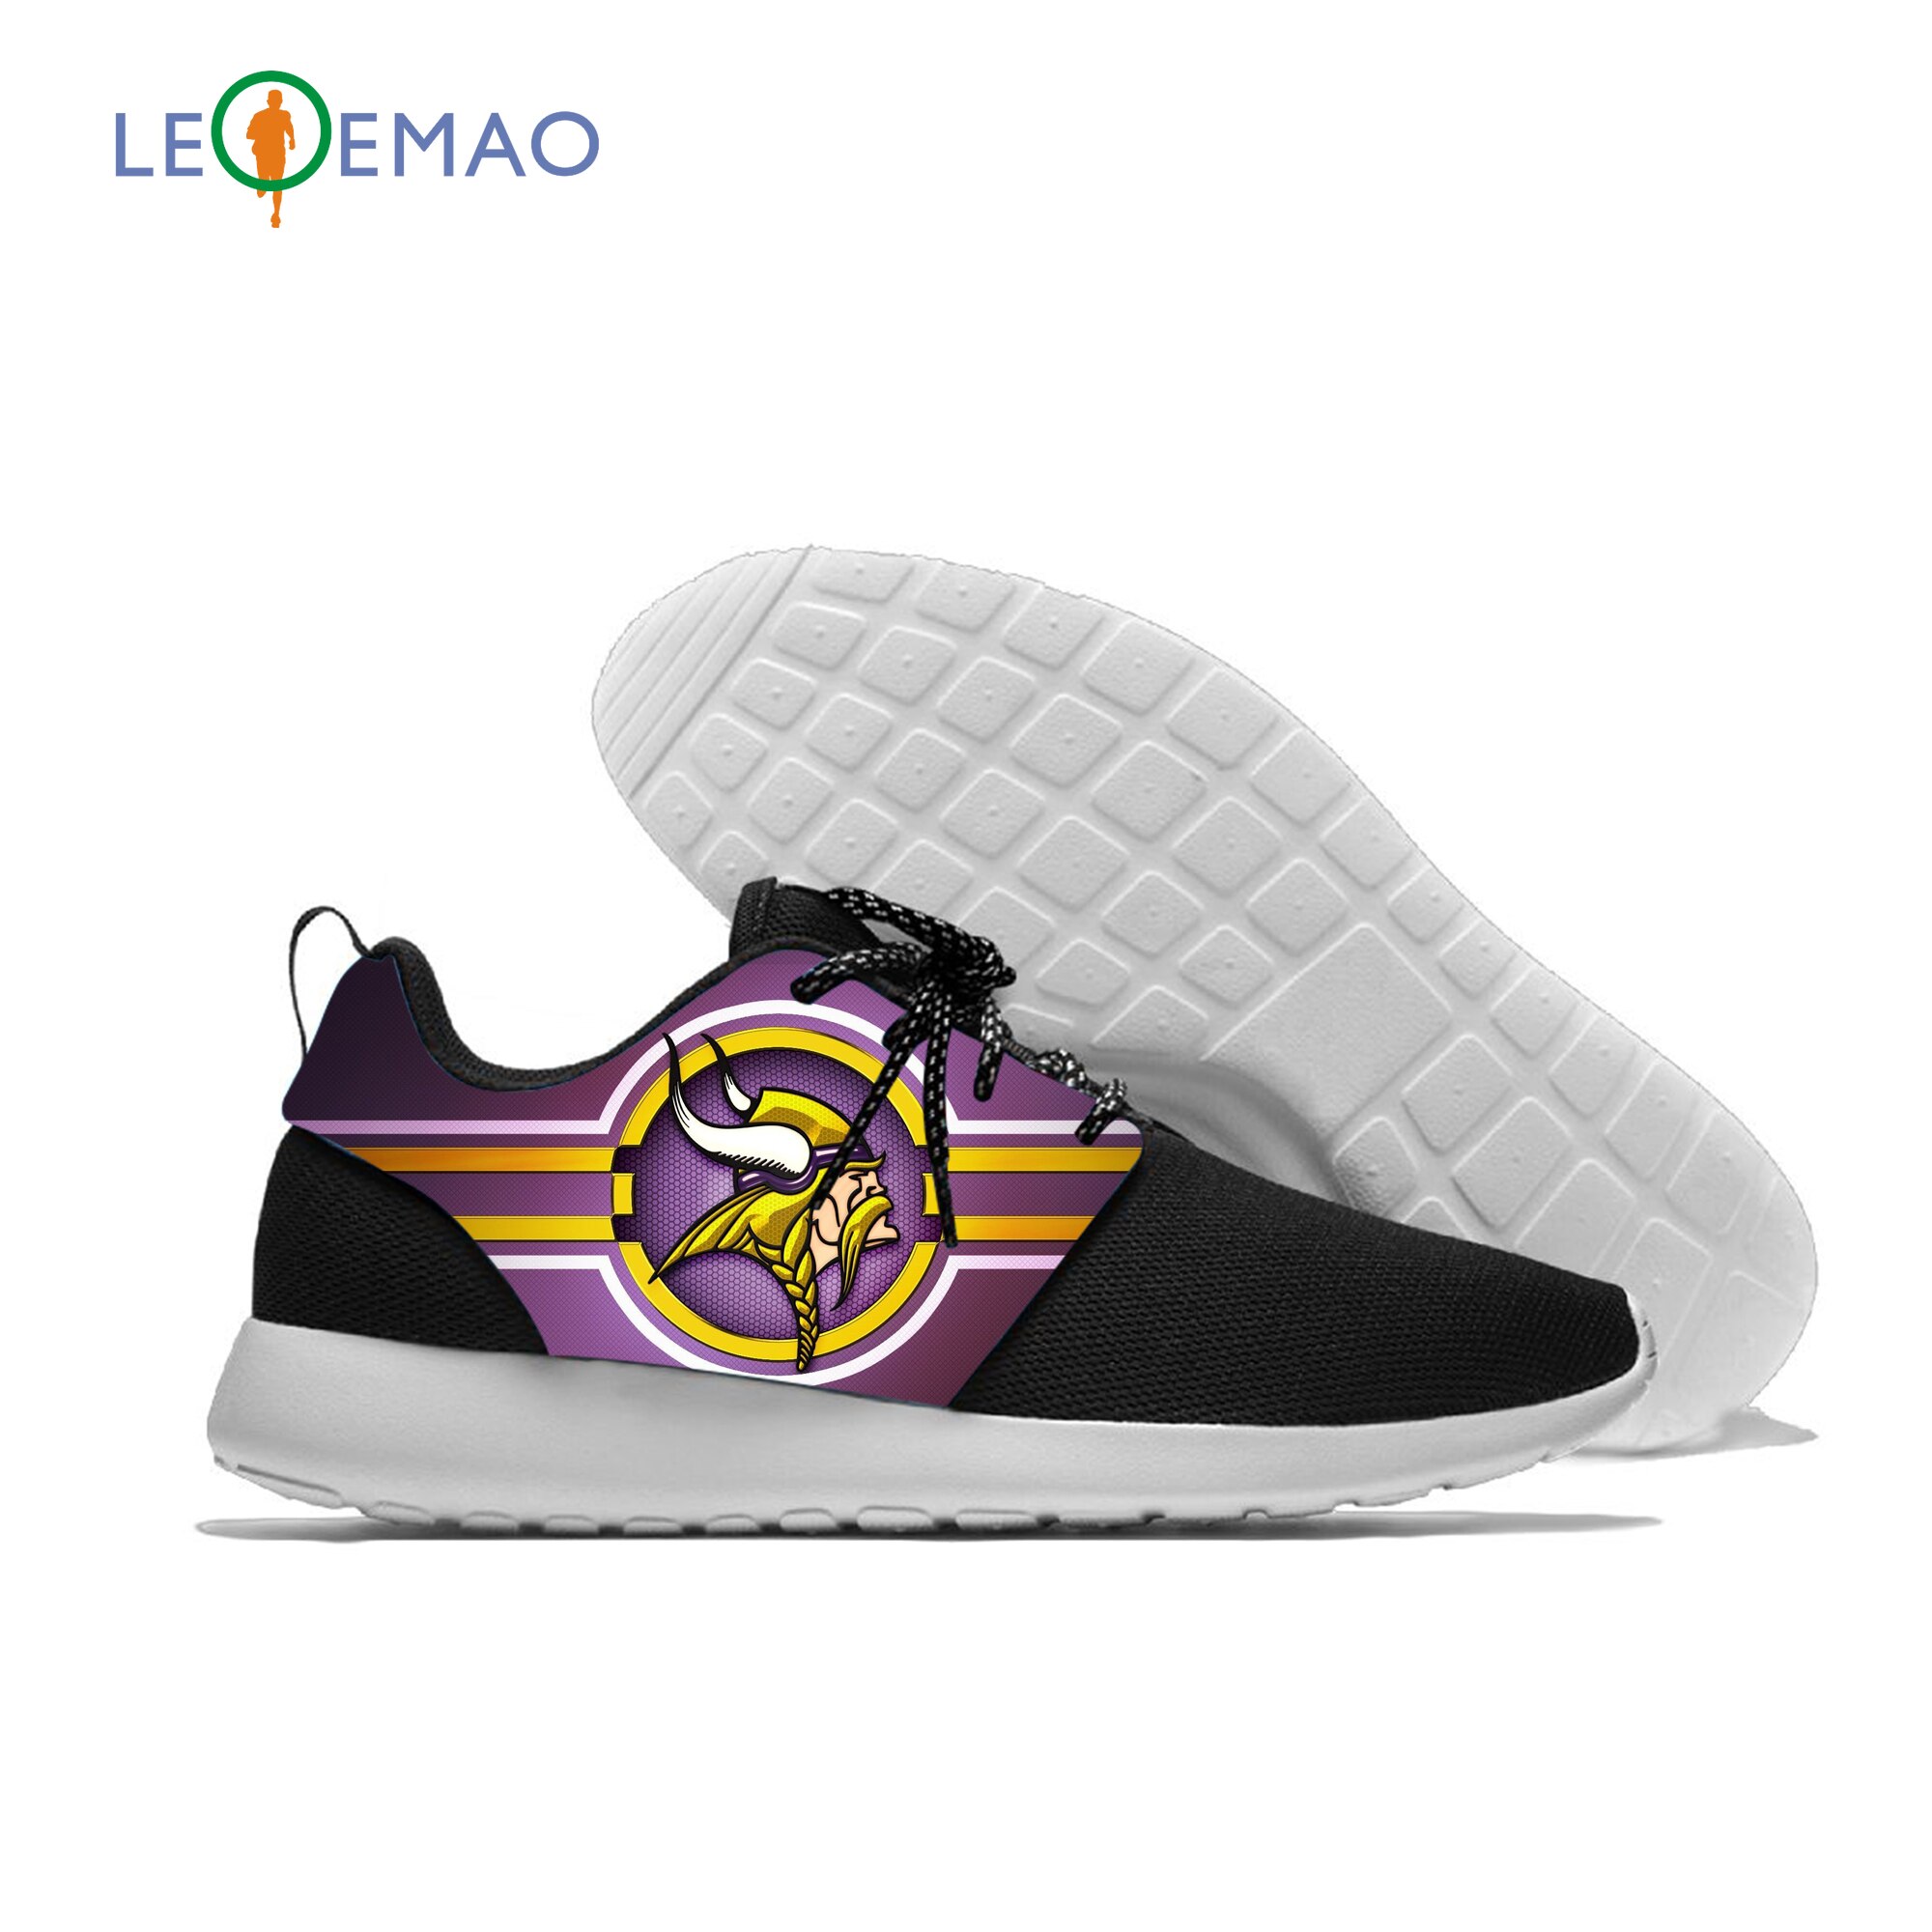 DIY Shoes Customized Vikings Image Logo Canvas Shoes Sneakers For Women Men Teenagers Casual Minnesota Fans Shoes